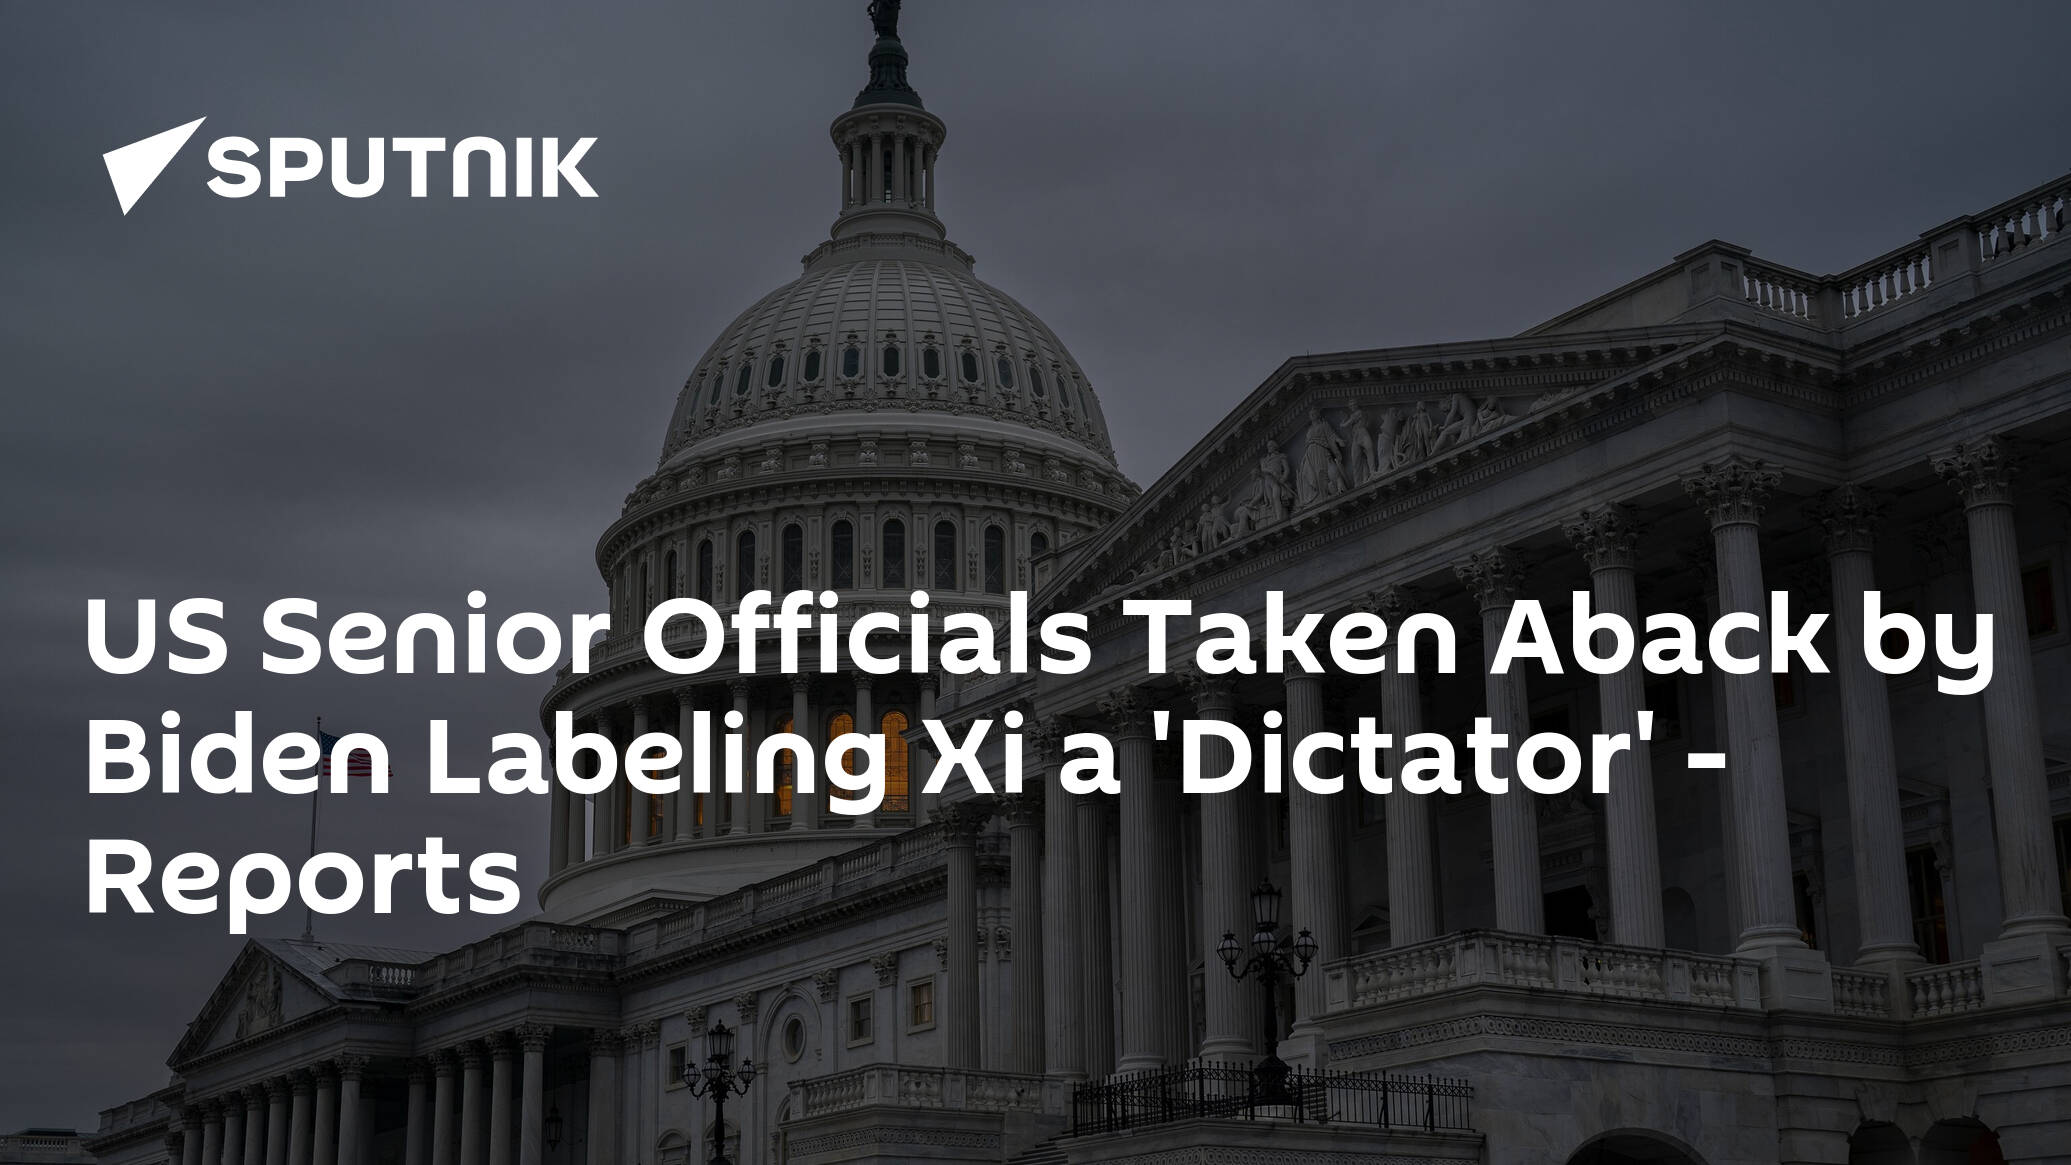 US Senior Officials Taken Aback by Biden Labeling Xi a 'Dictator' – Reports